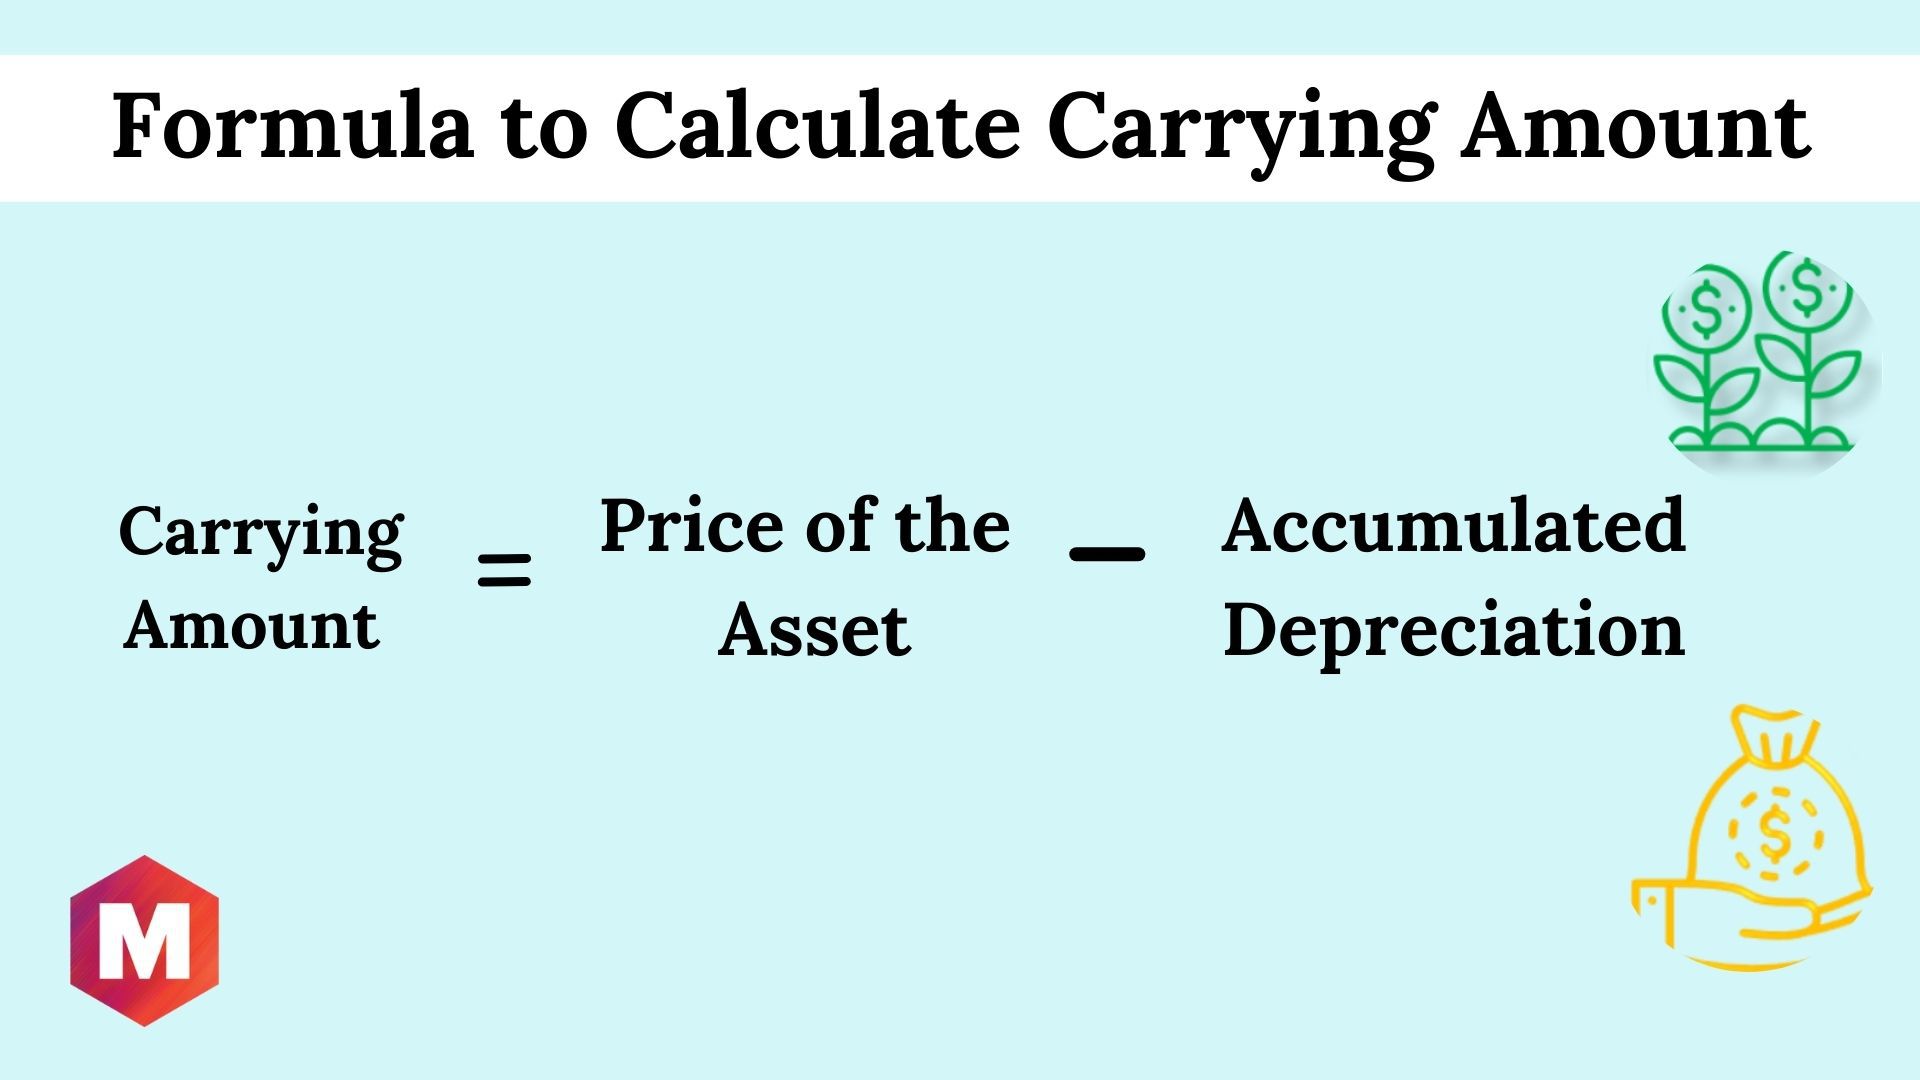 Calculation of Carrying Amount